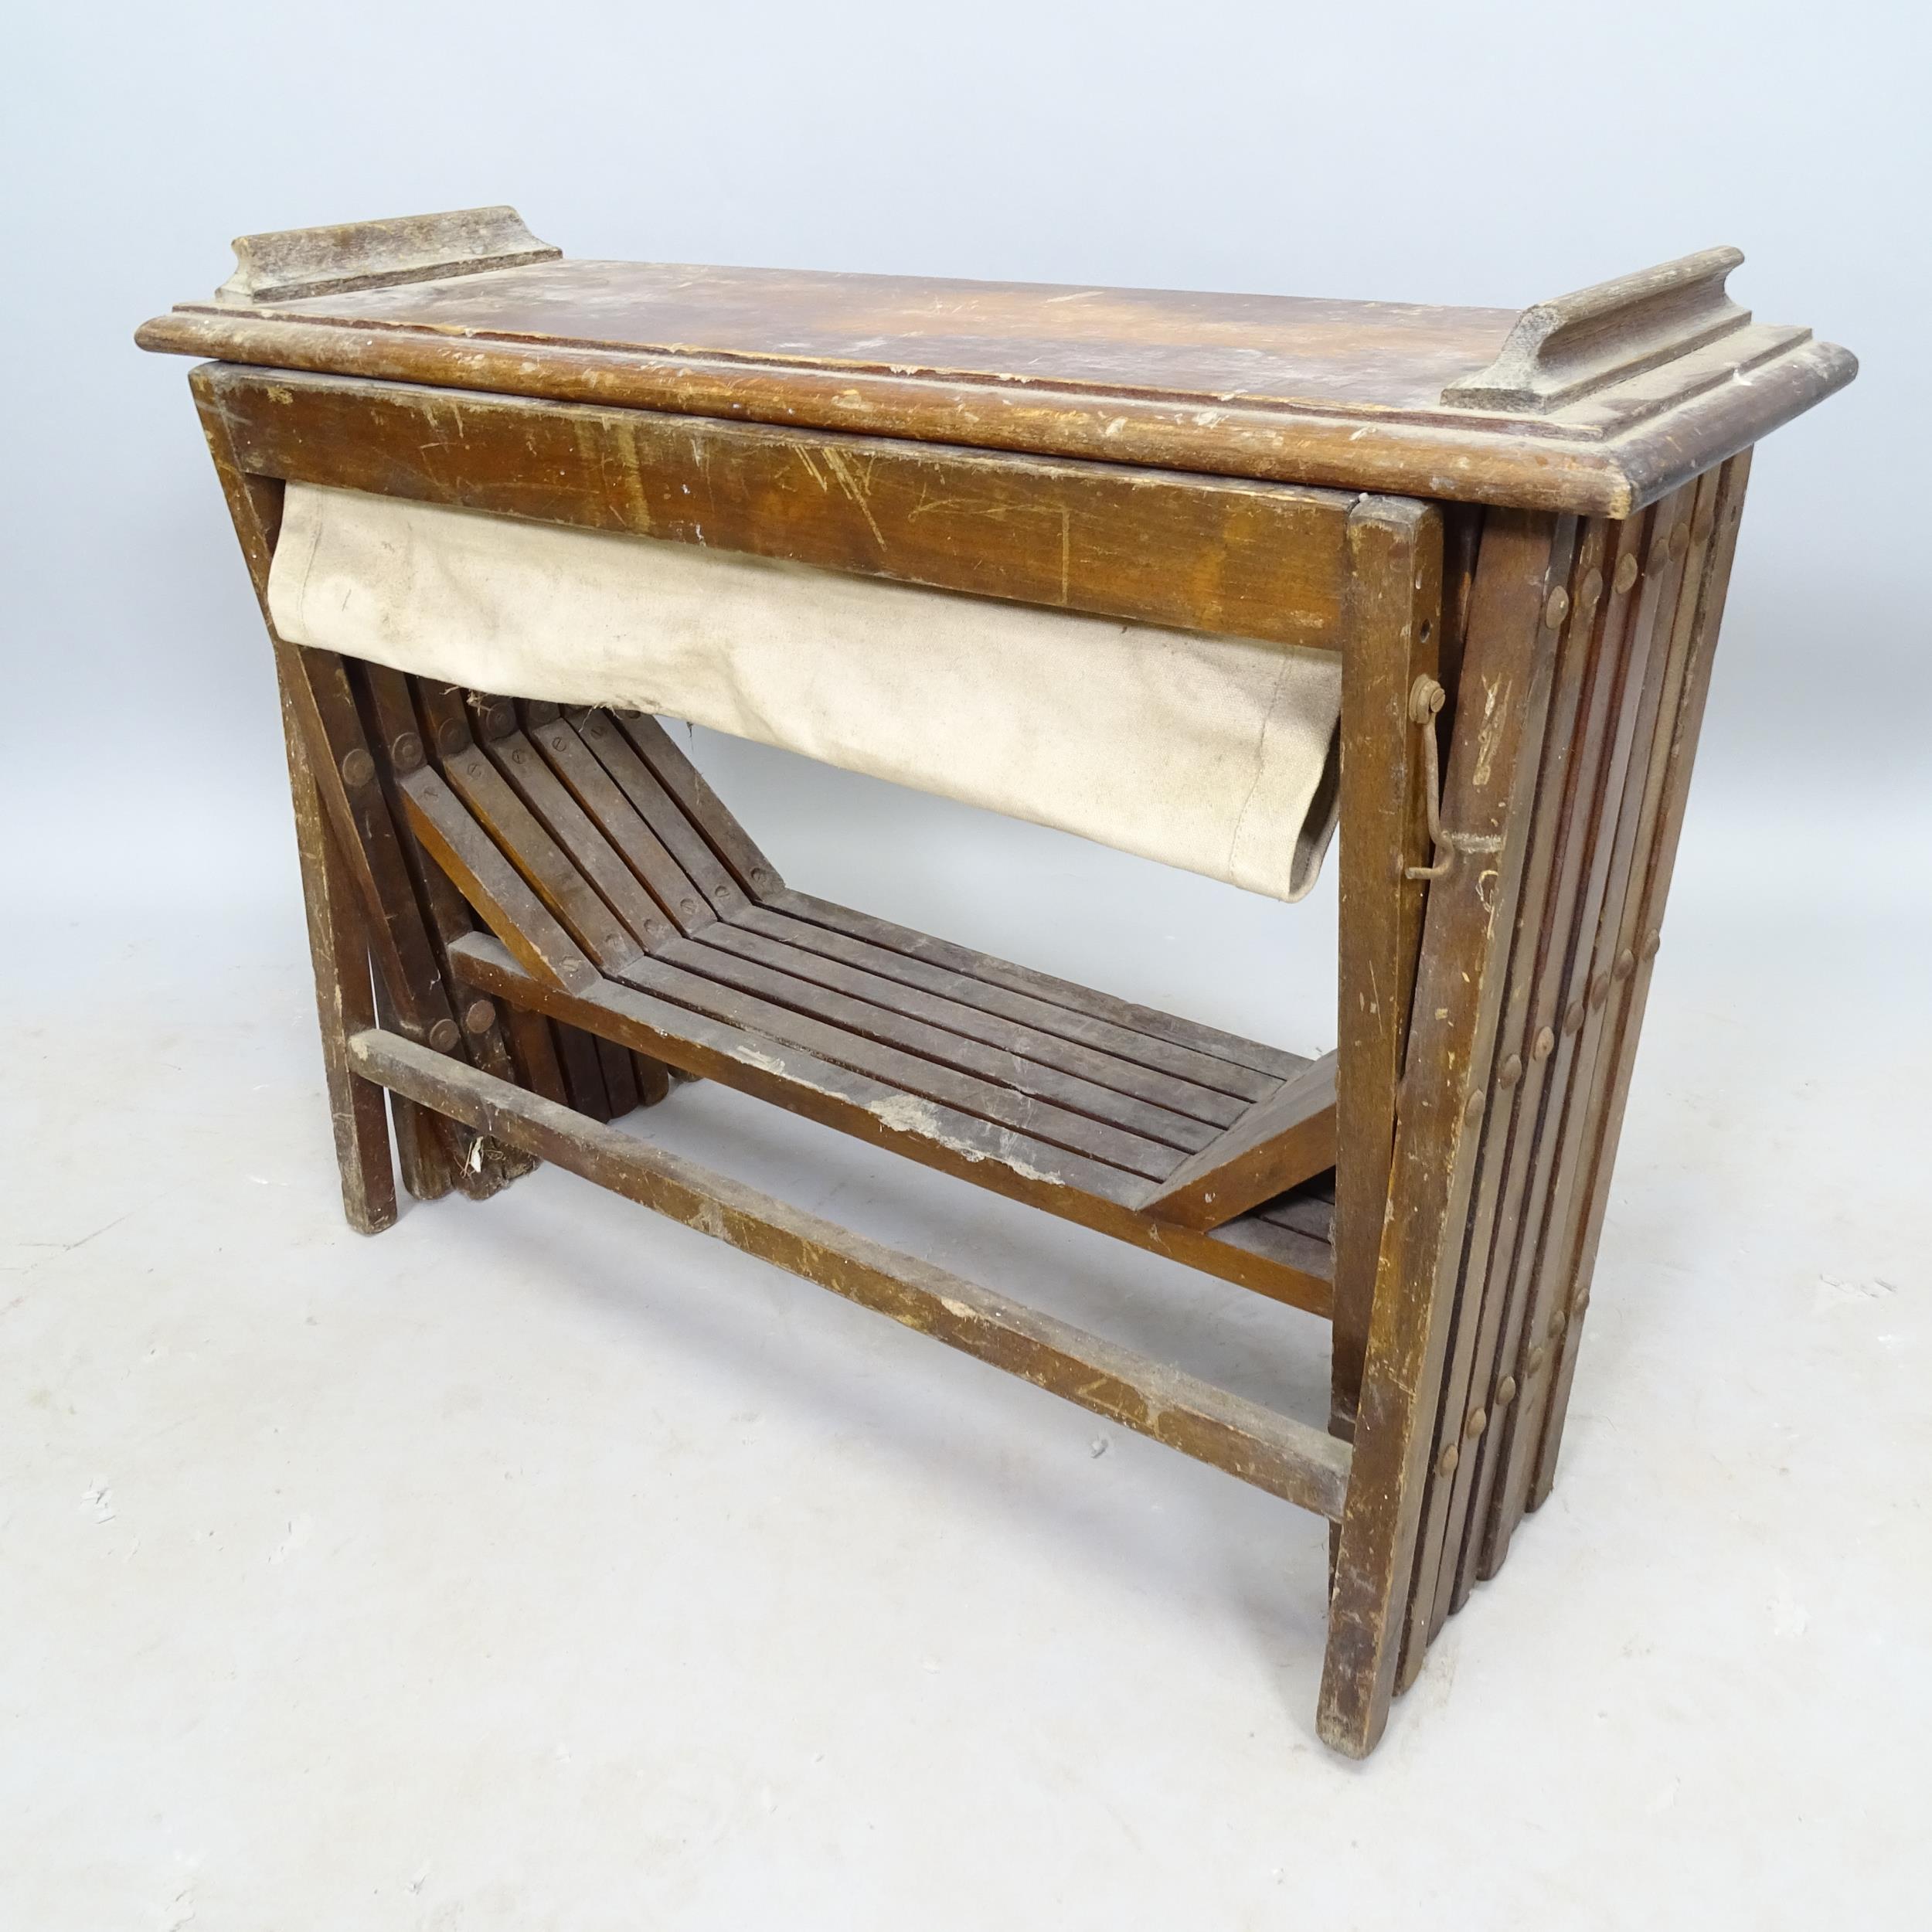 An early 20th century campaign folding bed